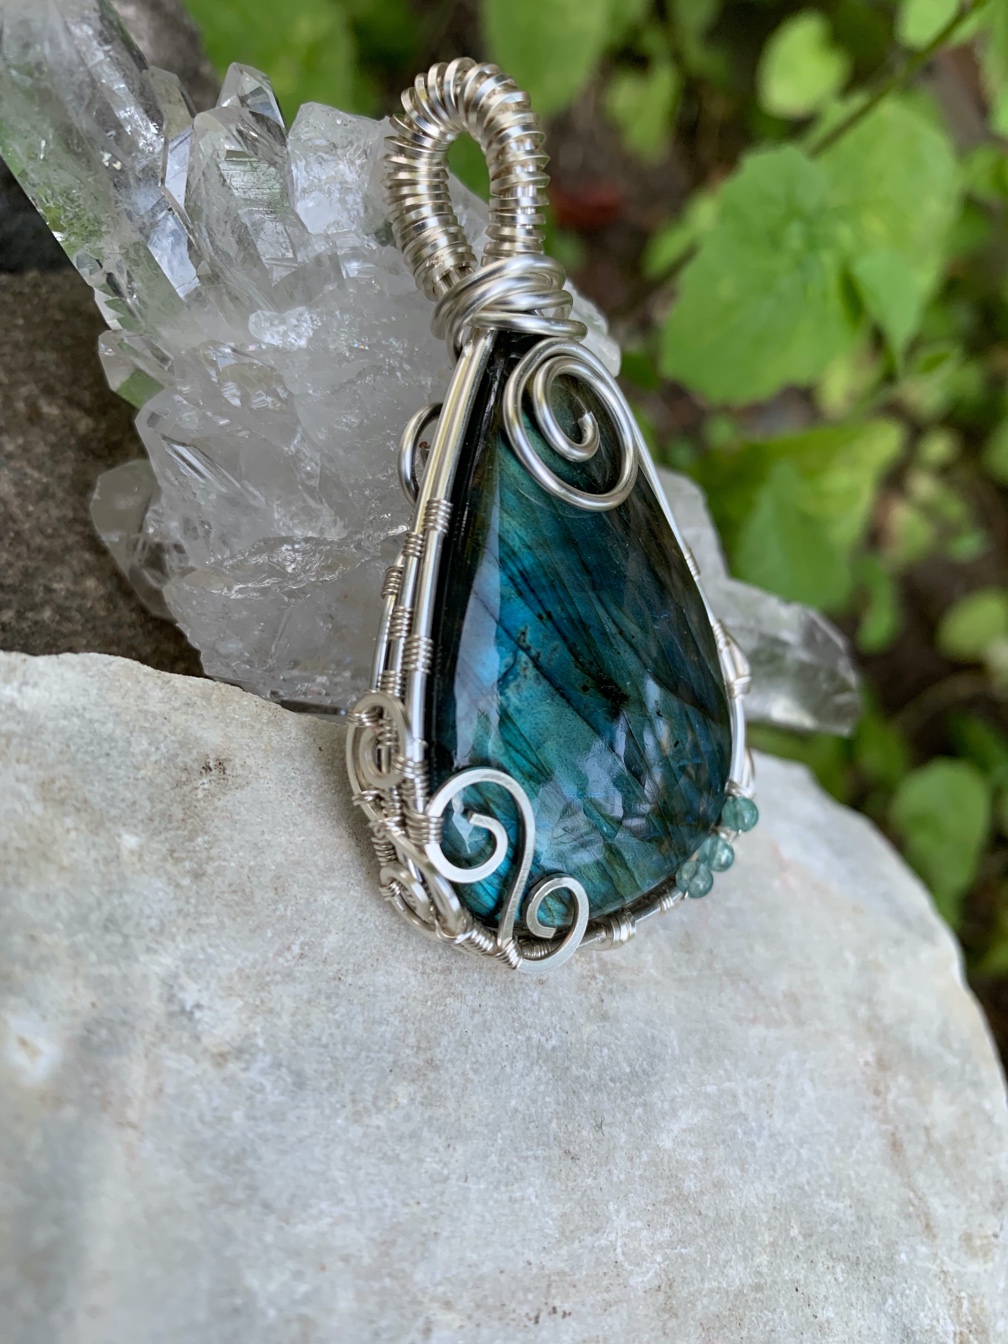 Turquoise stone ornately wrapped with silver-colored wire.